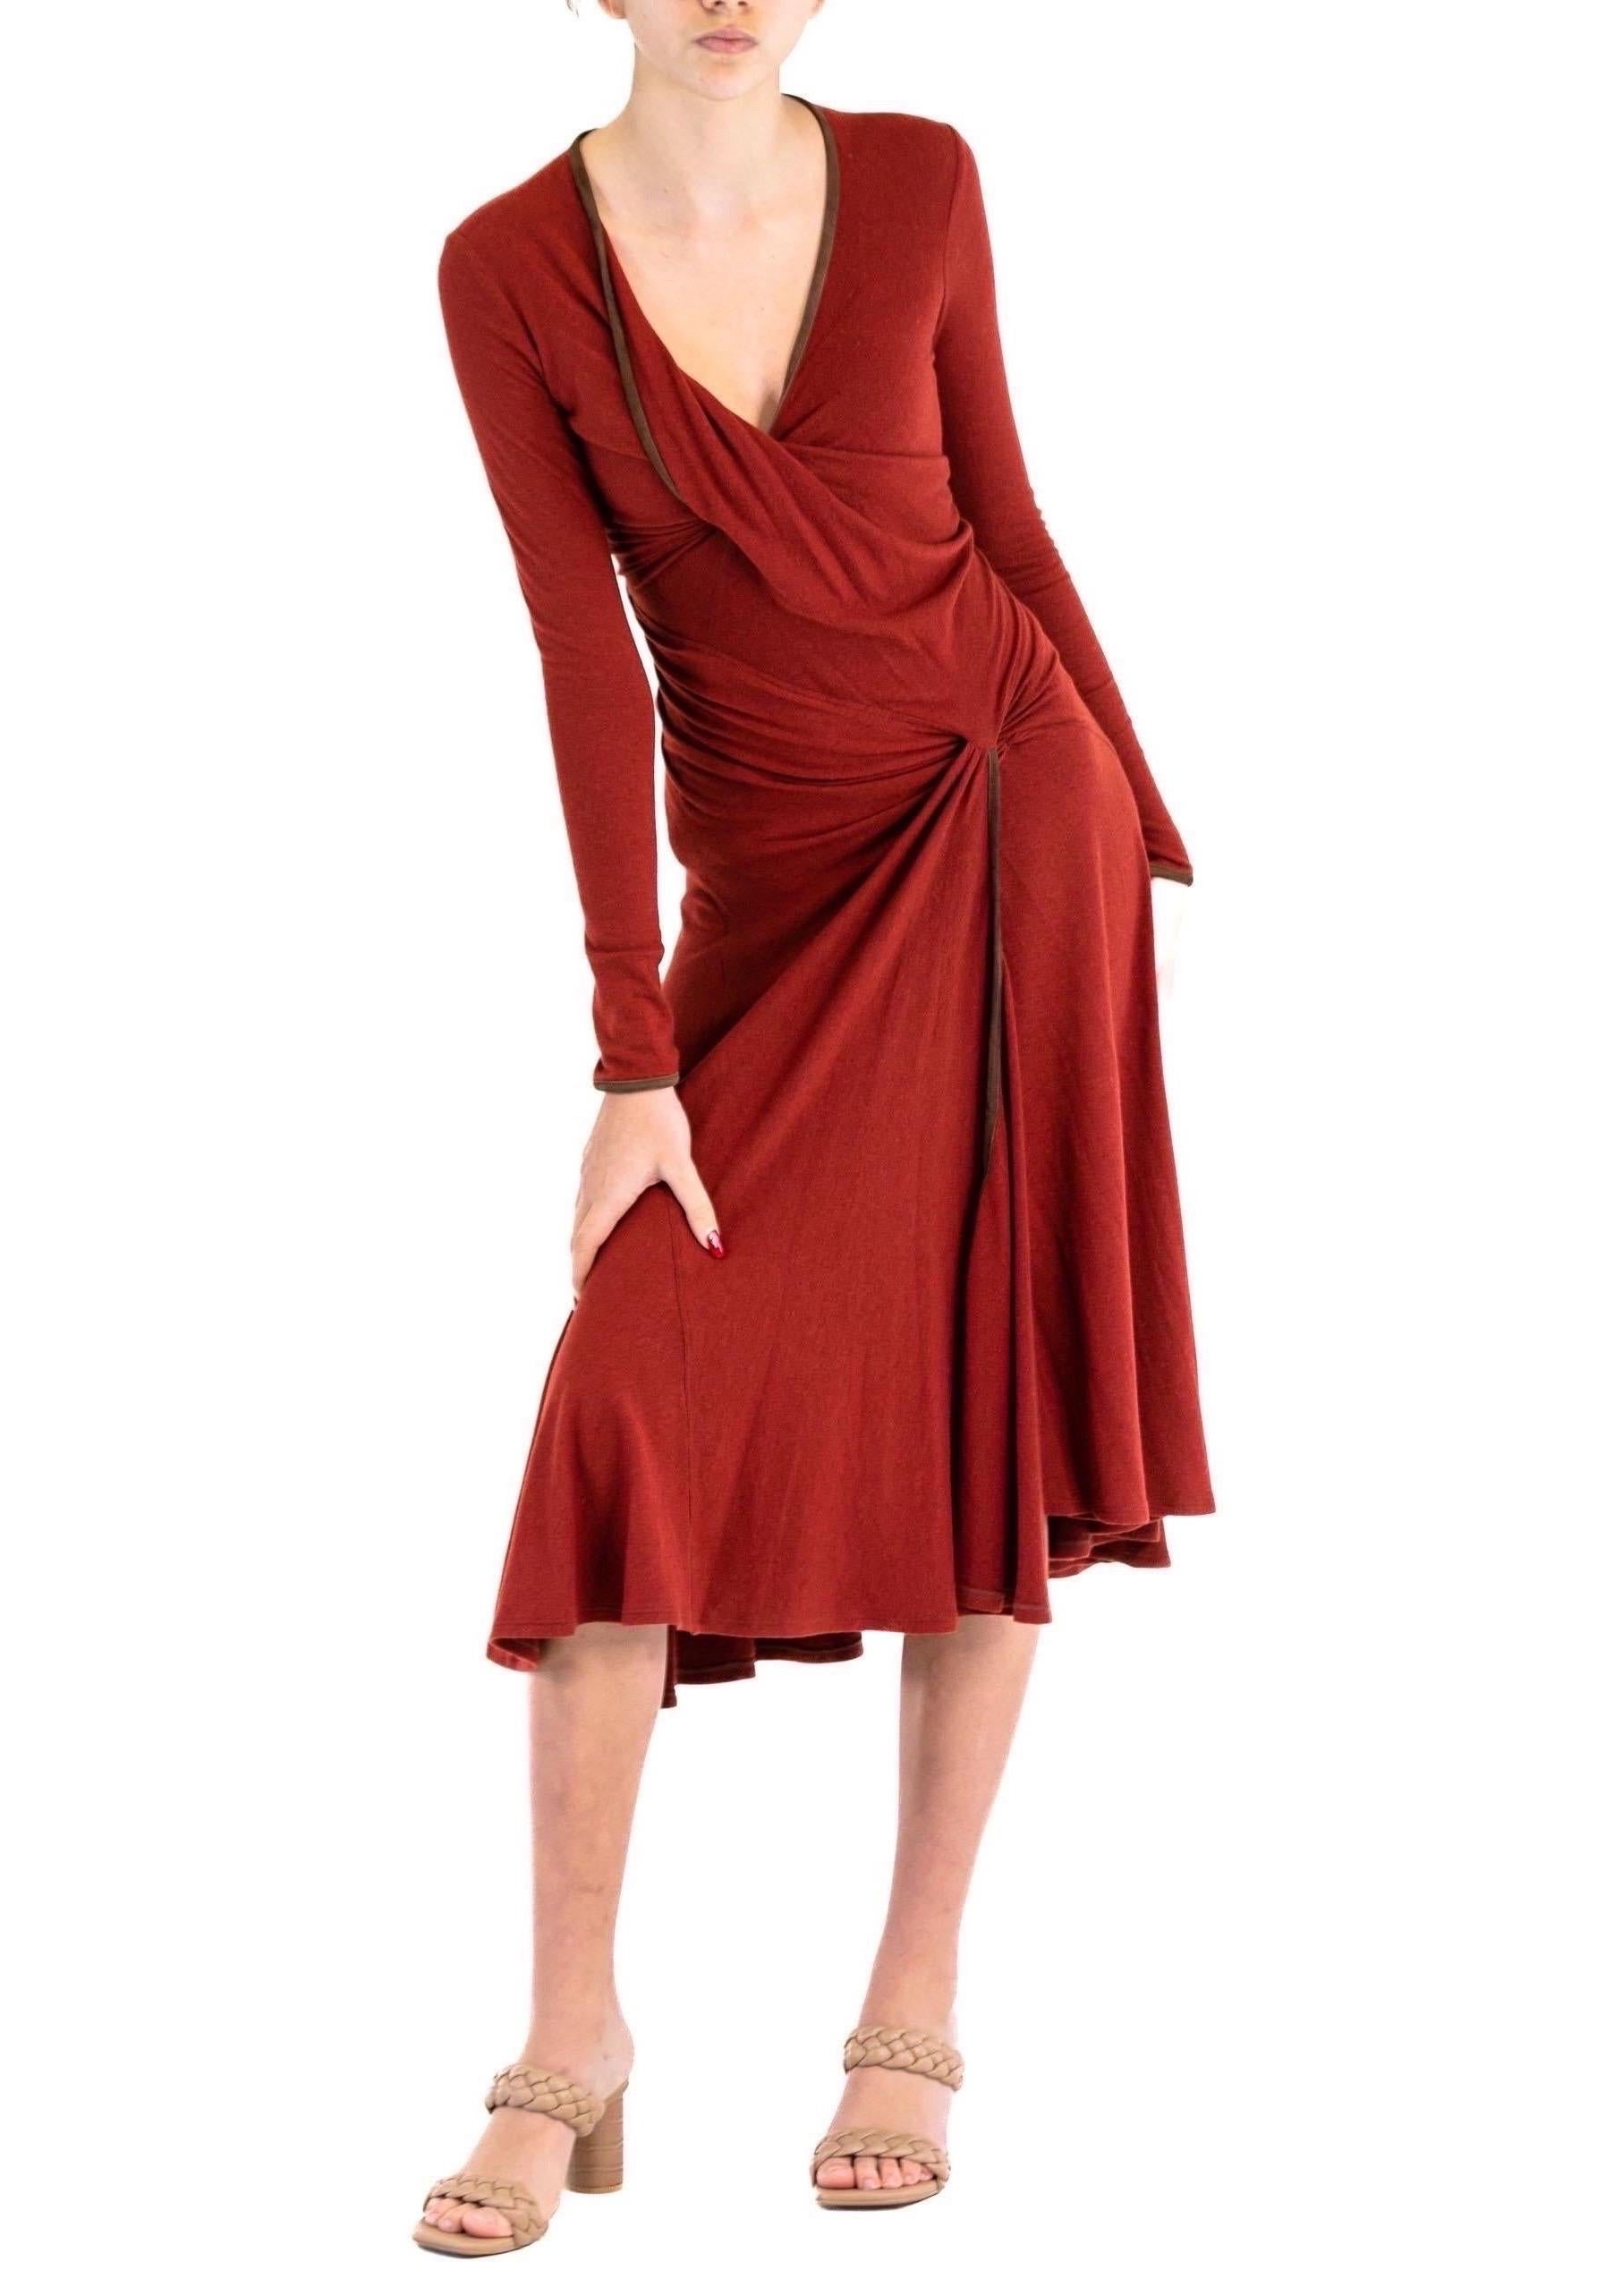 2000S DONNA KARAN Rust Red Wool Blend Jersey Dress With Lambskin Suede Trim For Sale 2